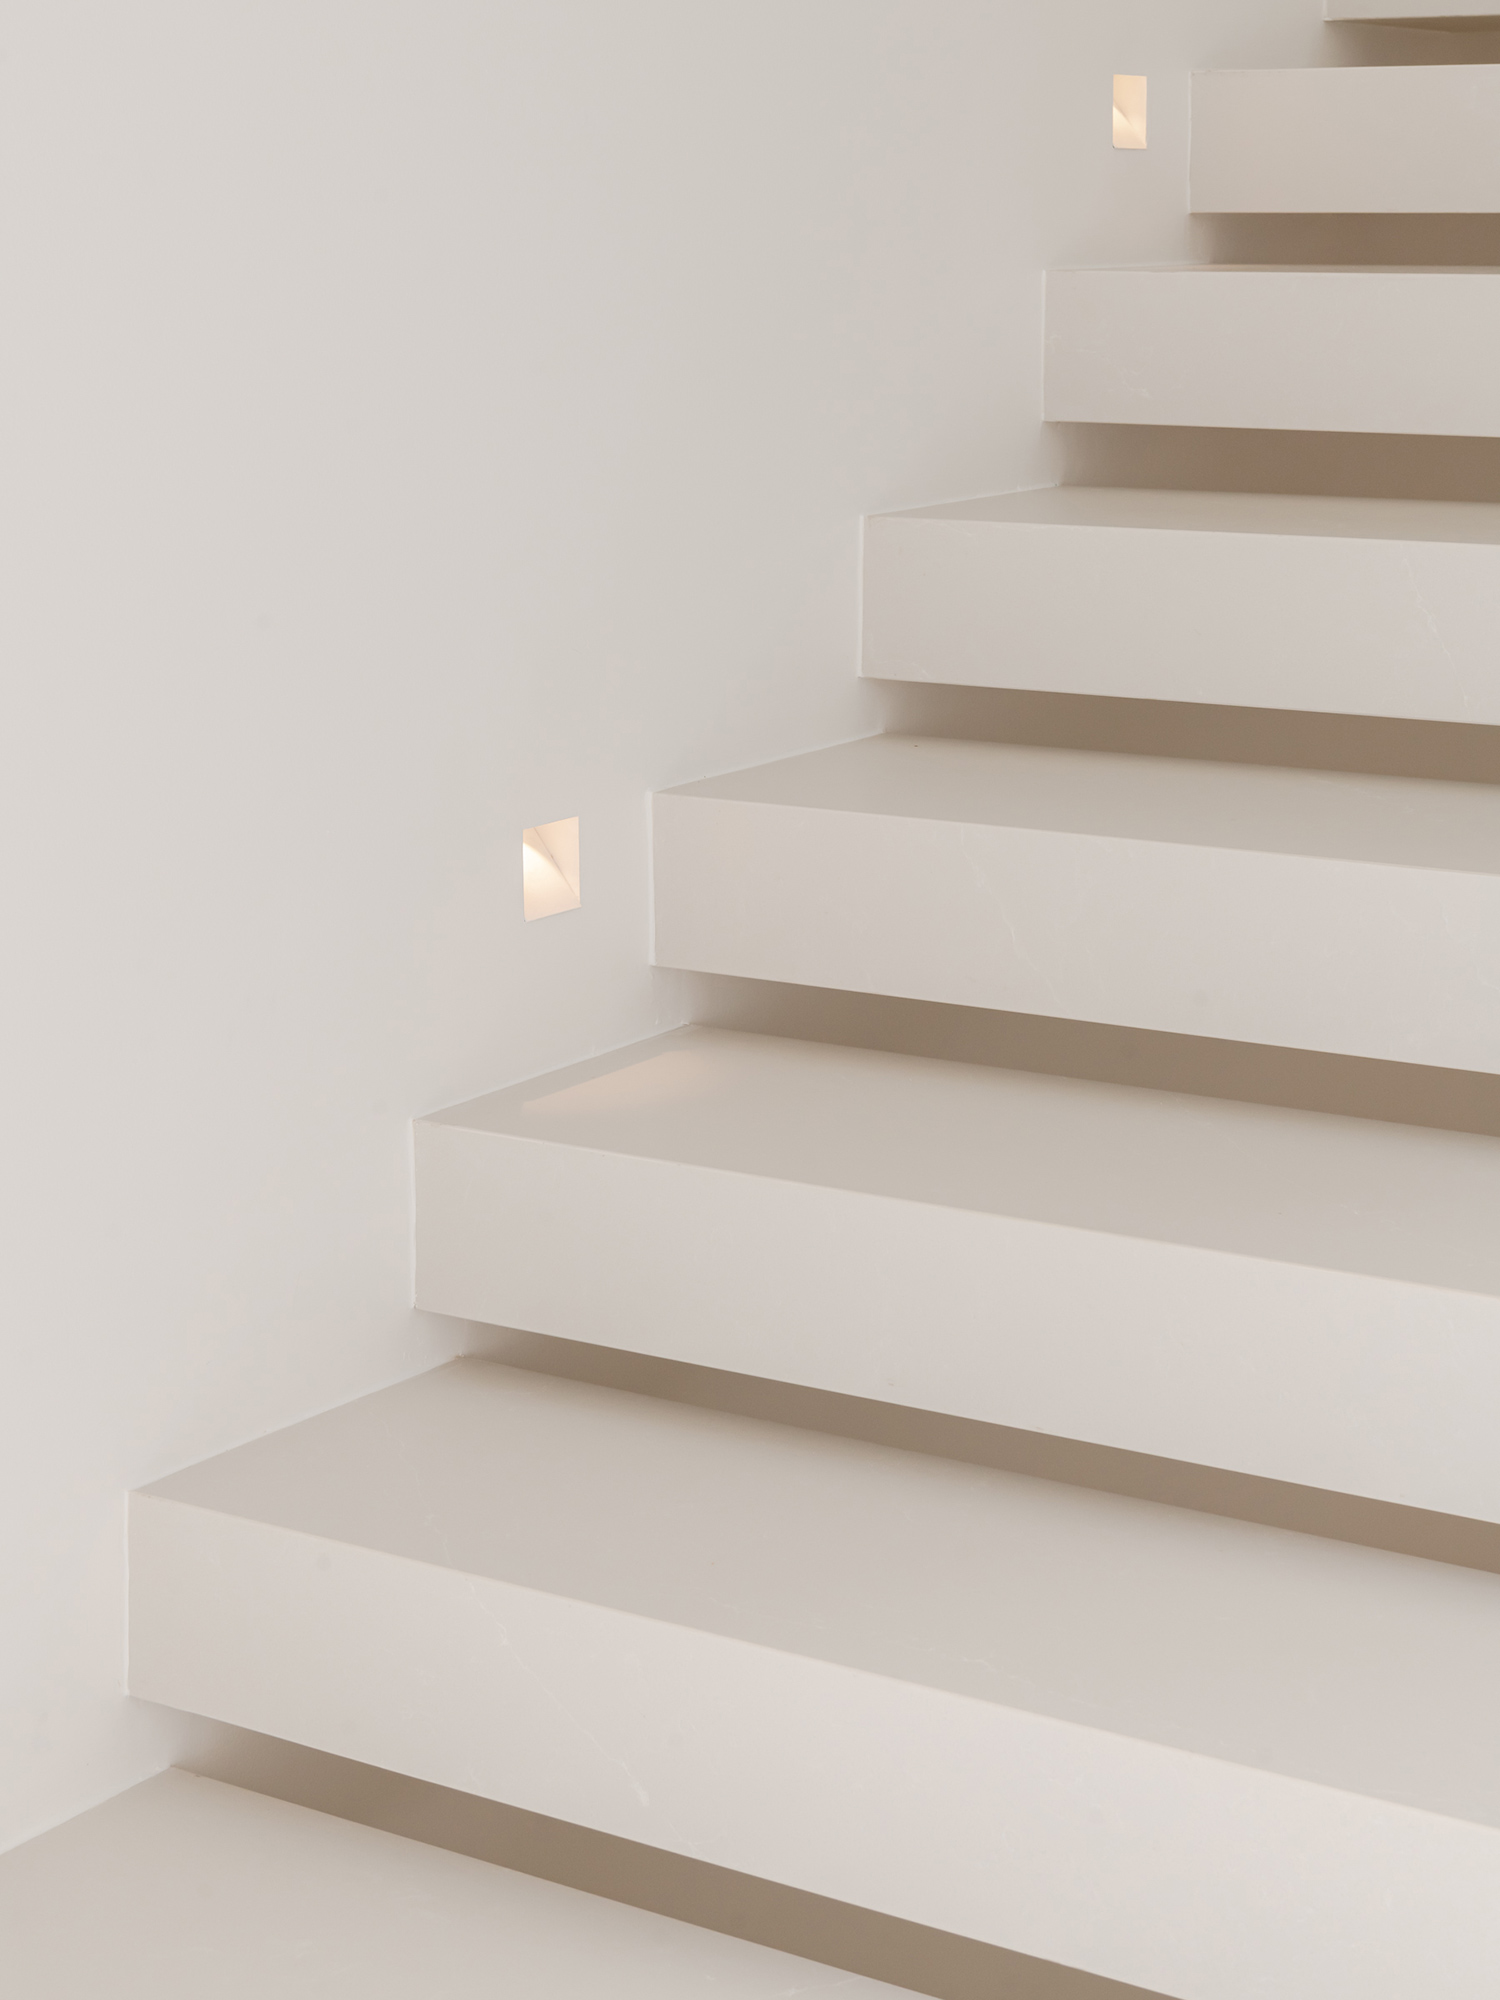 Image of DYP DualSpaceStudio JadeHill Stairs 006 in A floating staircase teams up with Silestone to achieve its elegant design - Cosentino